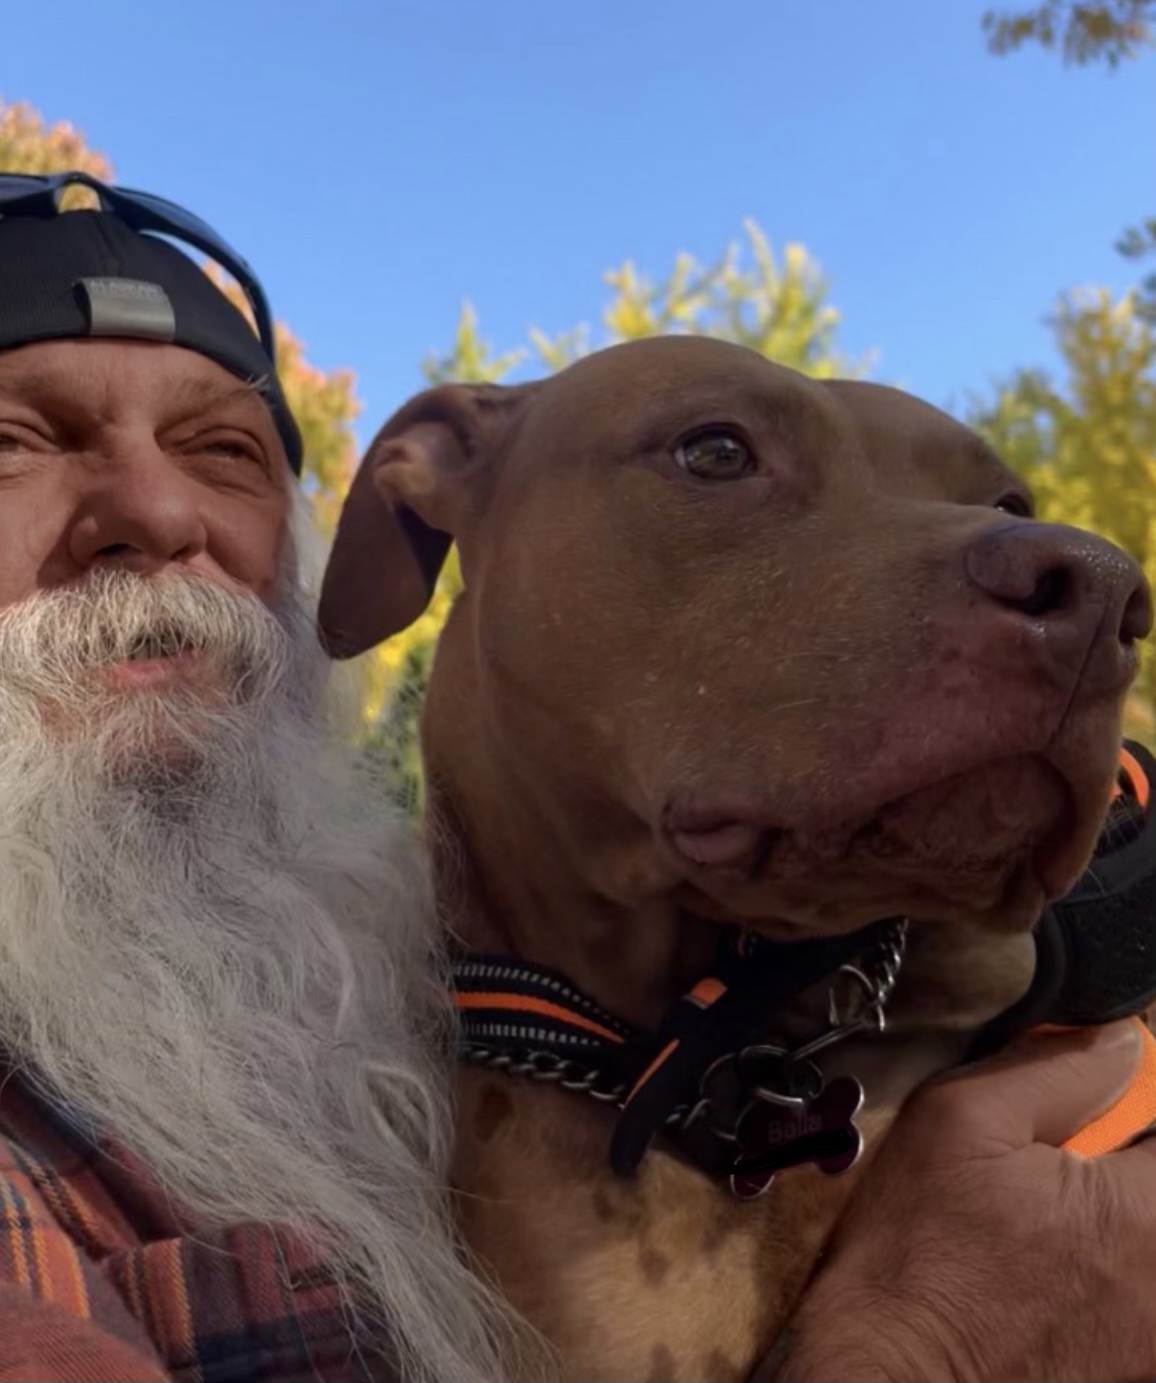 A brown-skinned man with a long white beard snuggles an adorable dog. The man is wearing a cap.